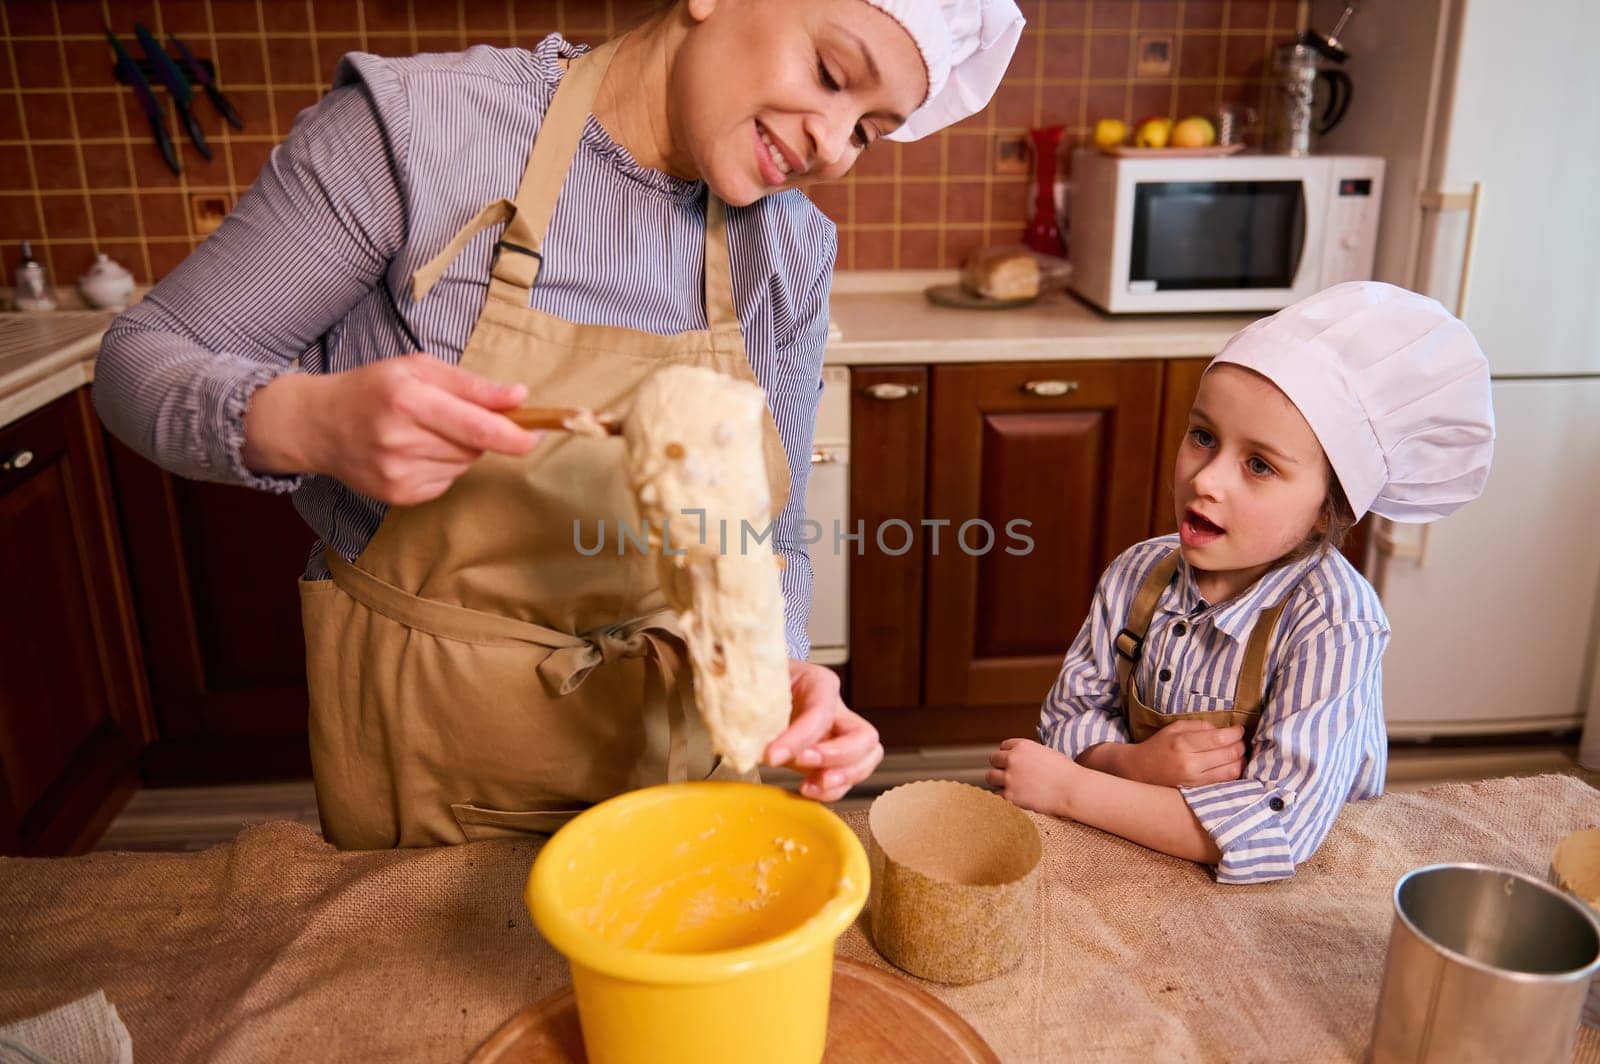 Amazed little toddler girl looking at her mom kneading dough, while preparing delicious homemade Easter cakes at home kitchen interior. Adorable daughter helping her mother preparing festive pastries